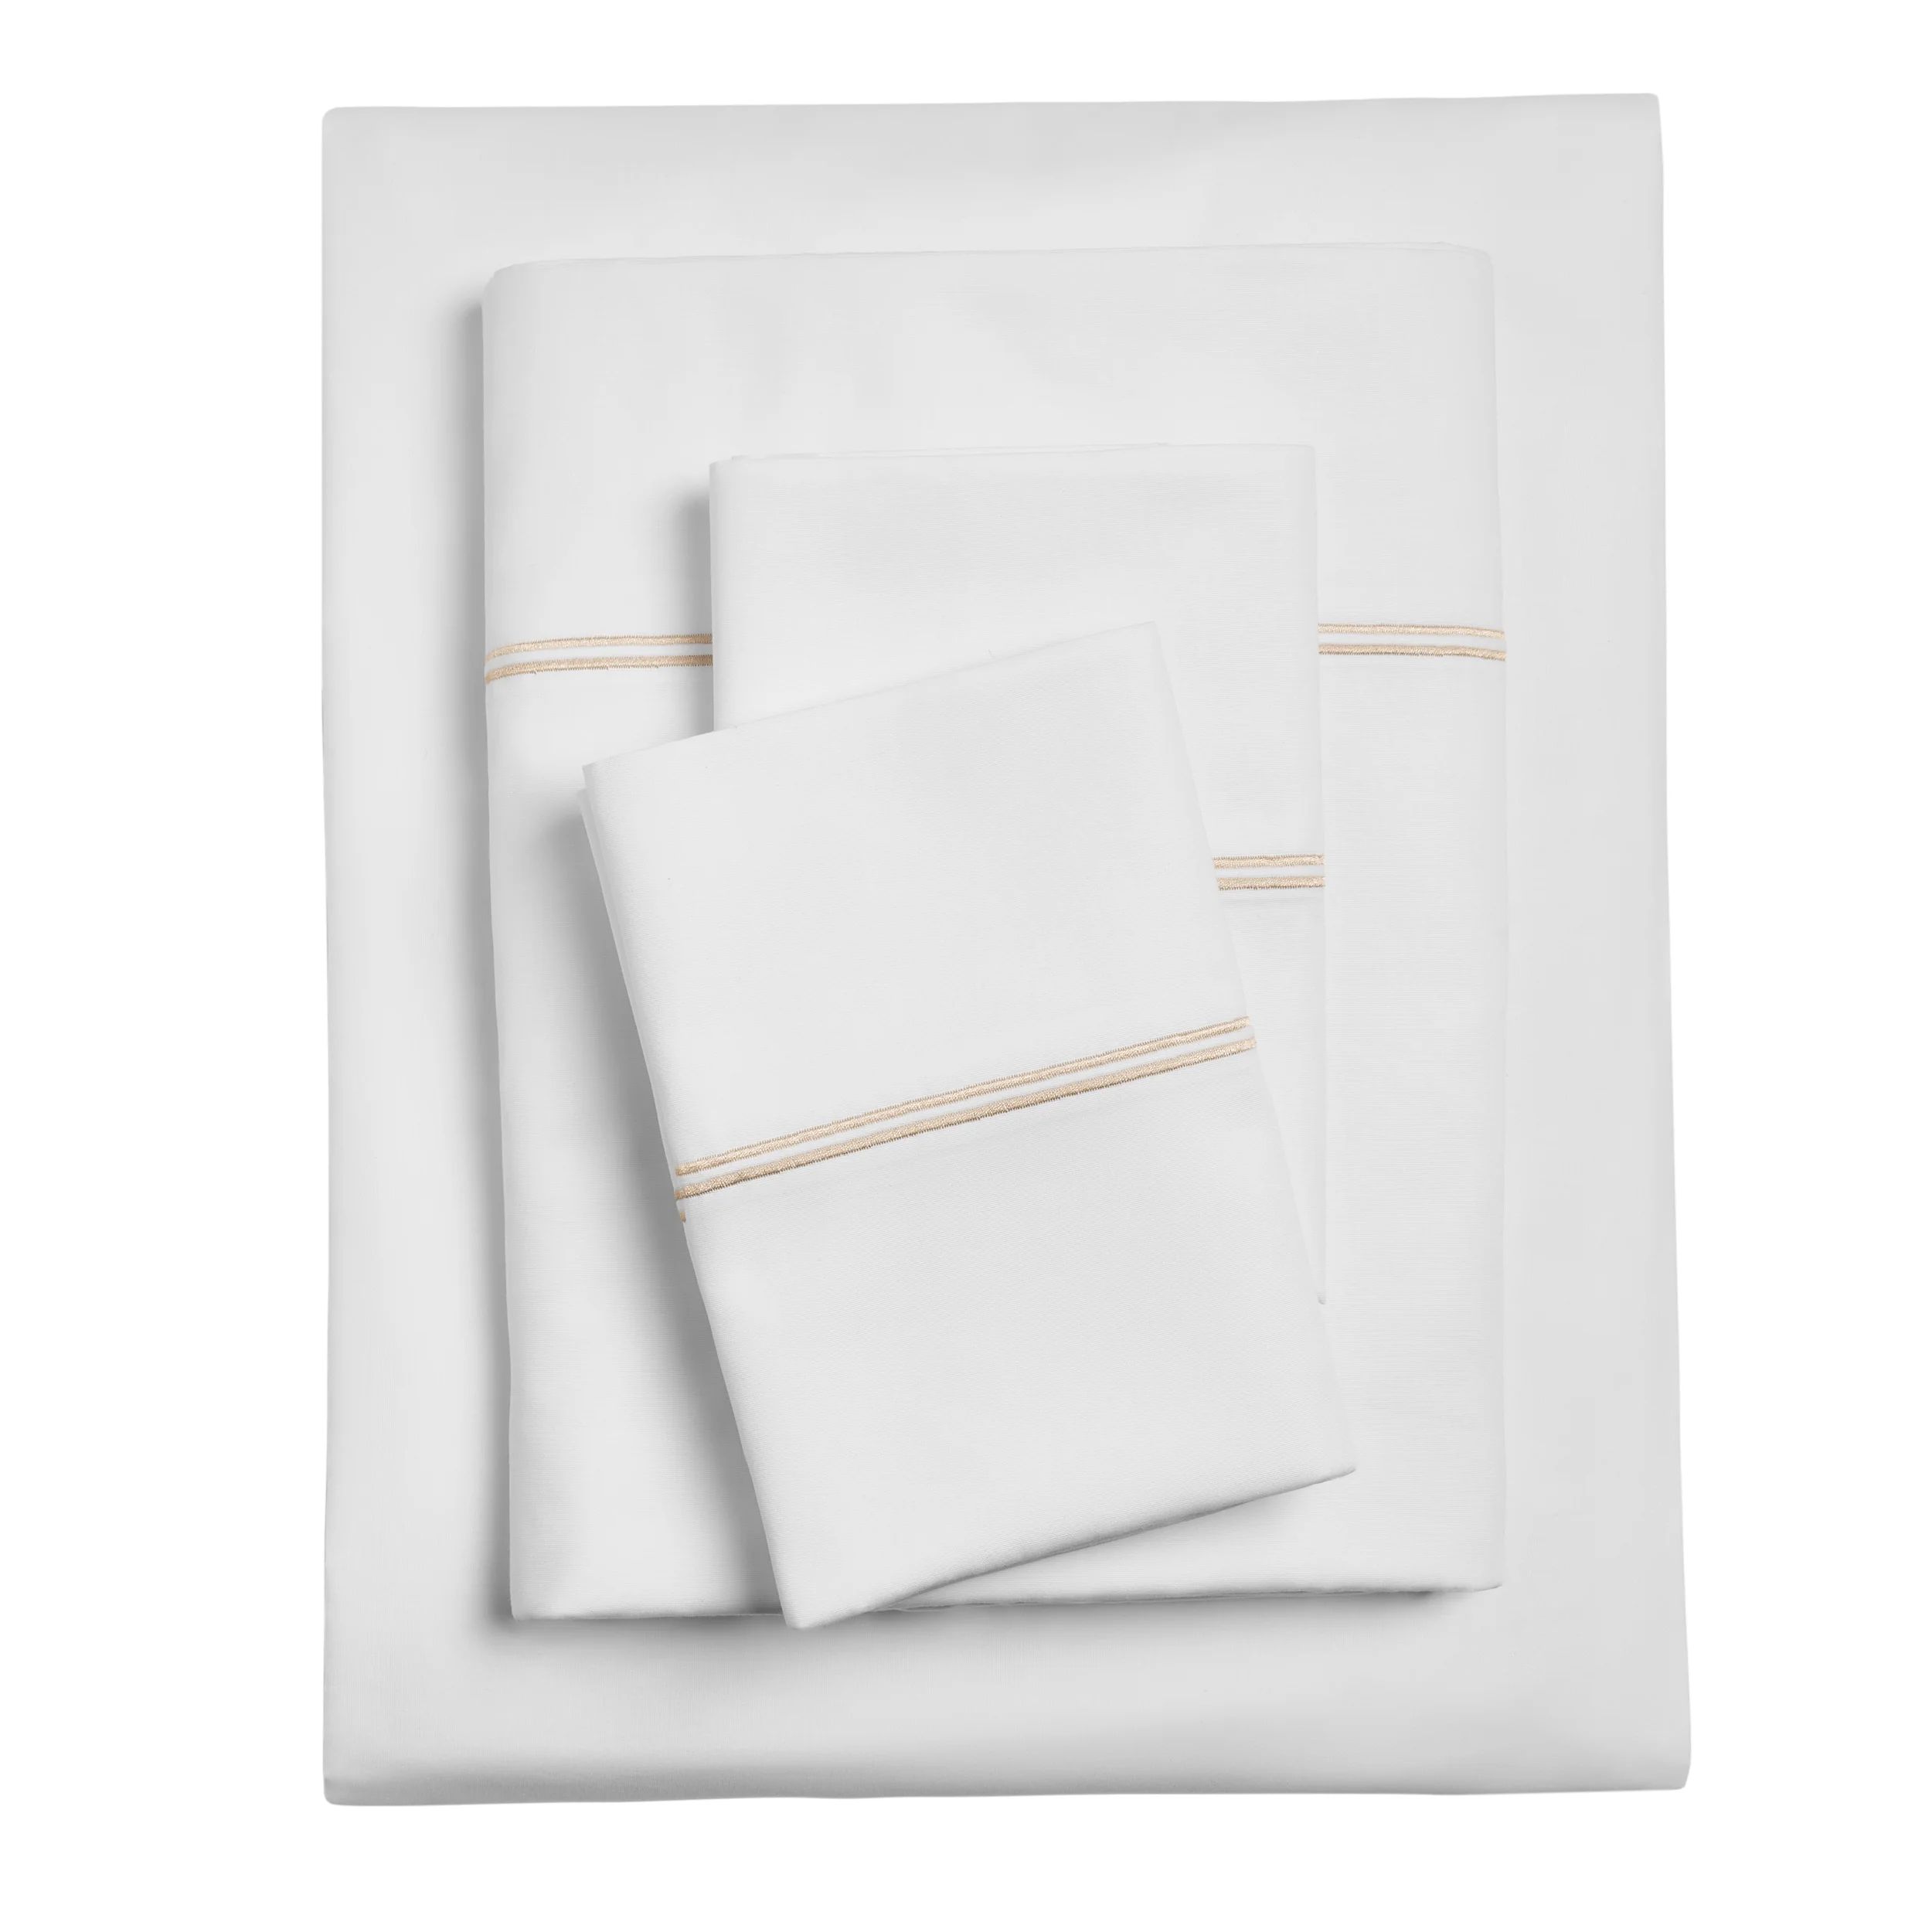 Hotel Style 4-Piece 300 Thread Count White Pima Cotton Bed Sheet Set with Tan Hem, King | Walmart (US)